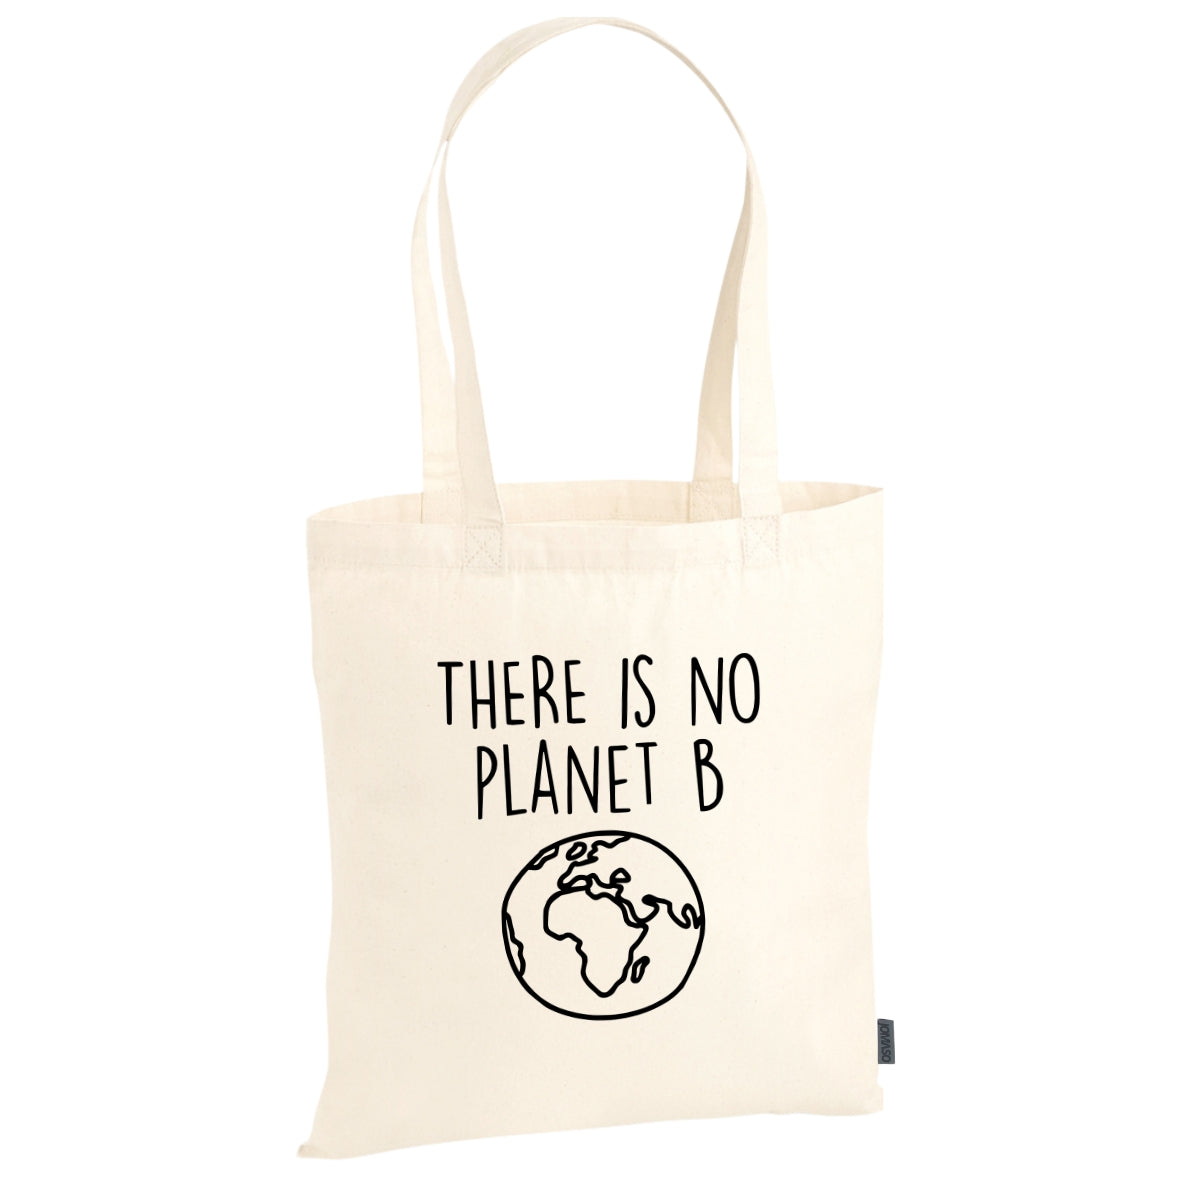 Baumwollbeutel | "There is no planet b Welt"